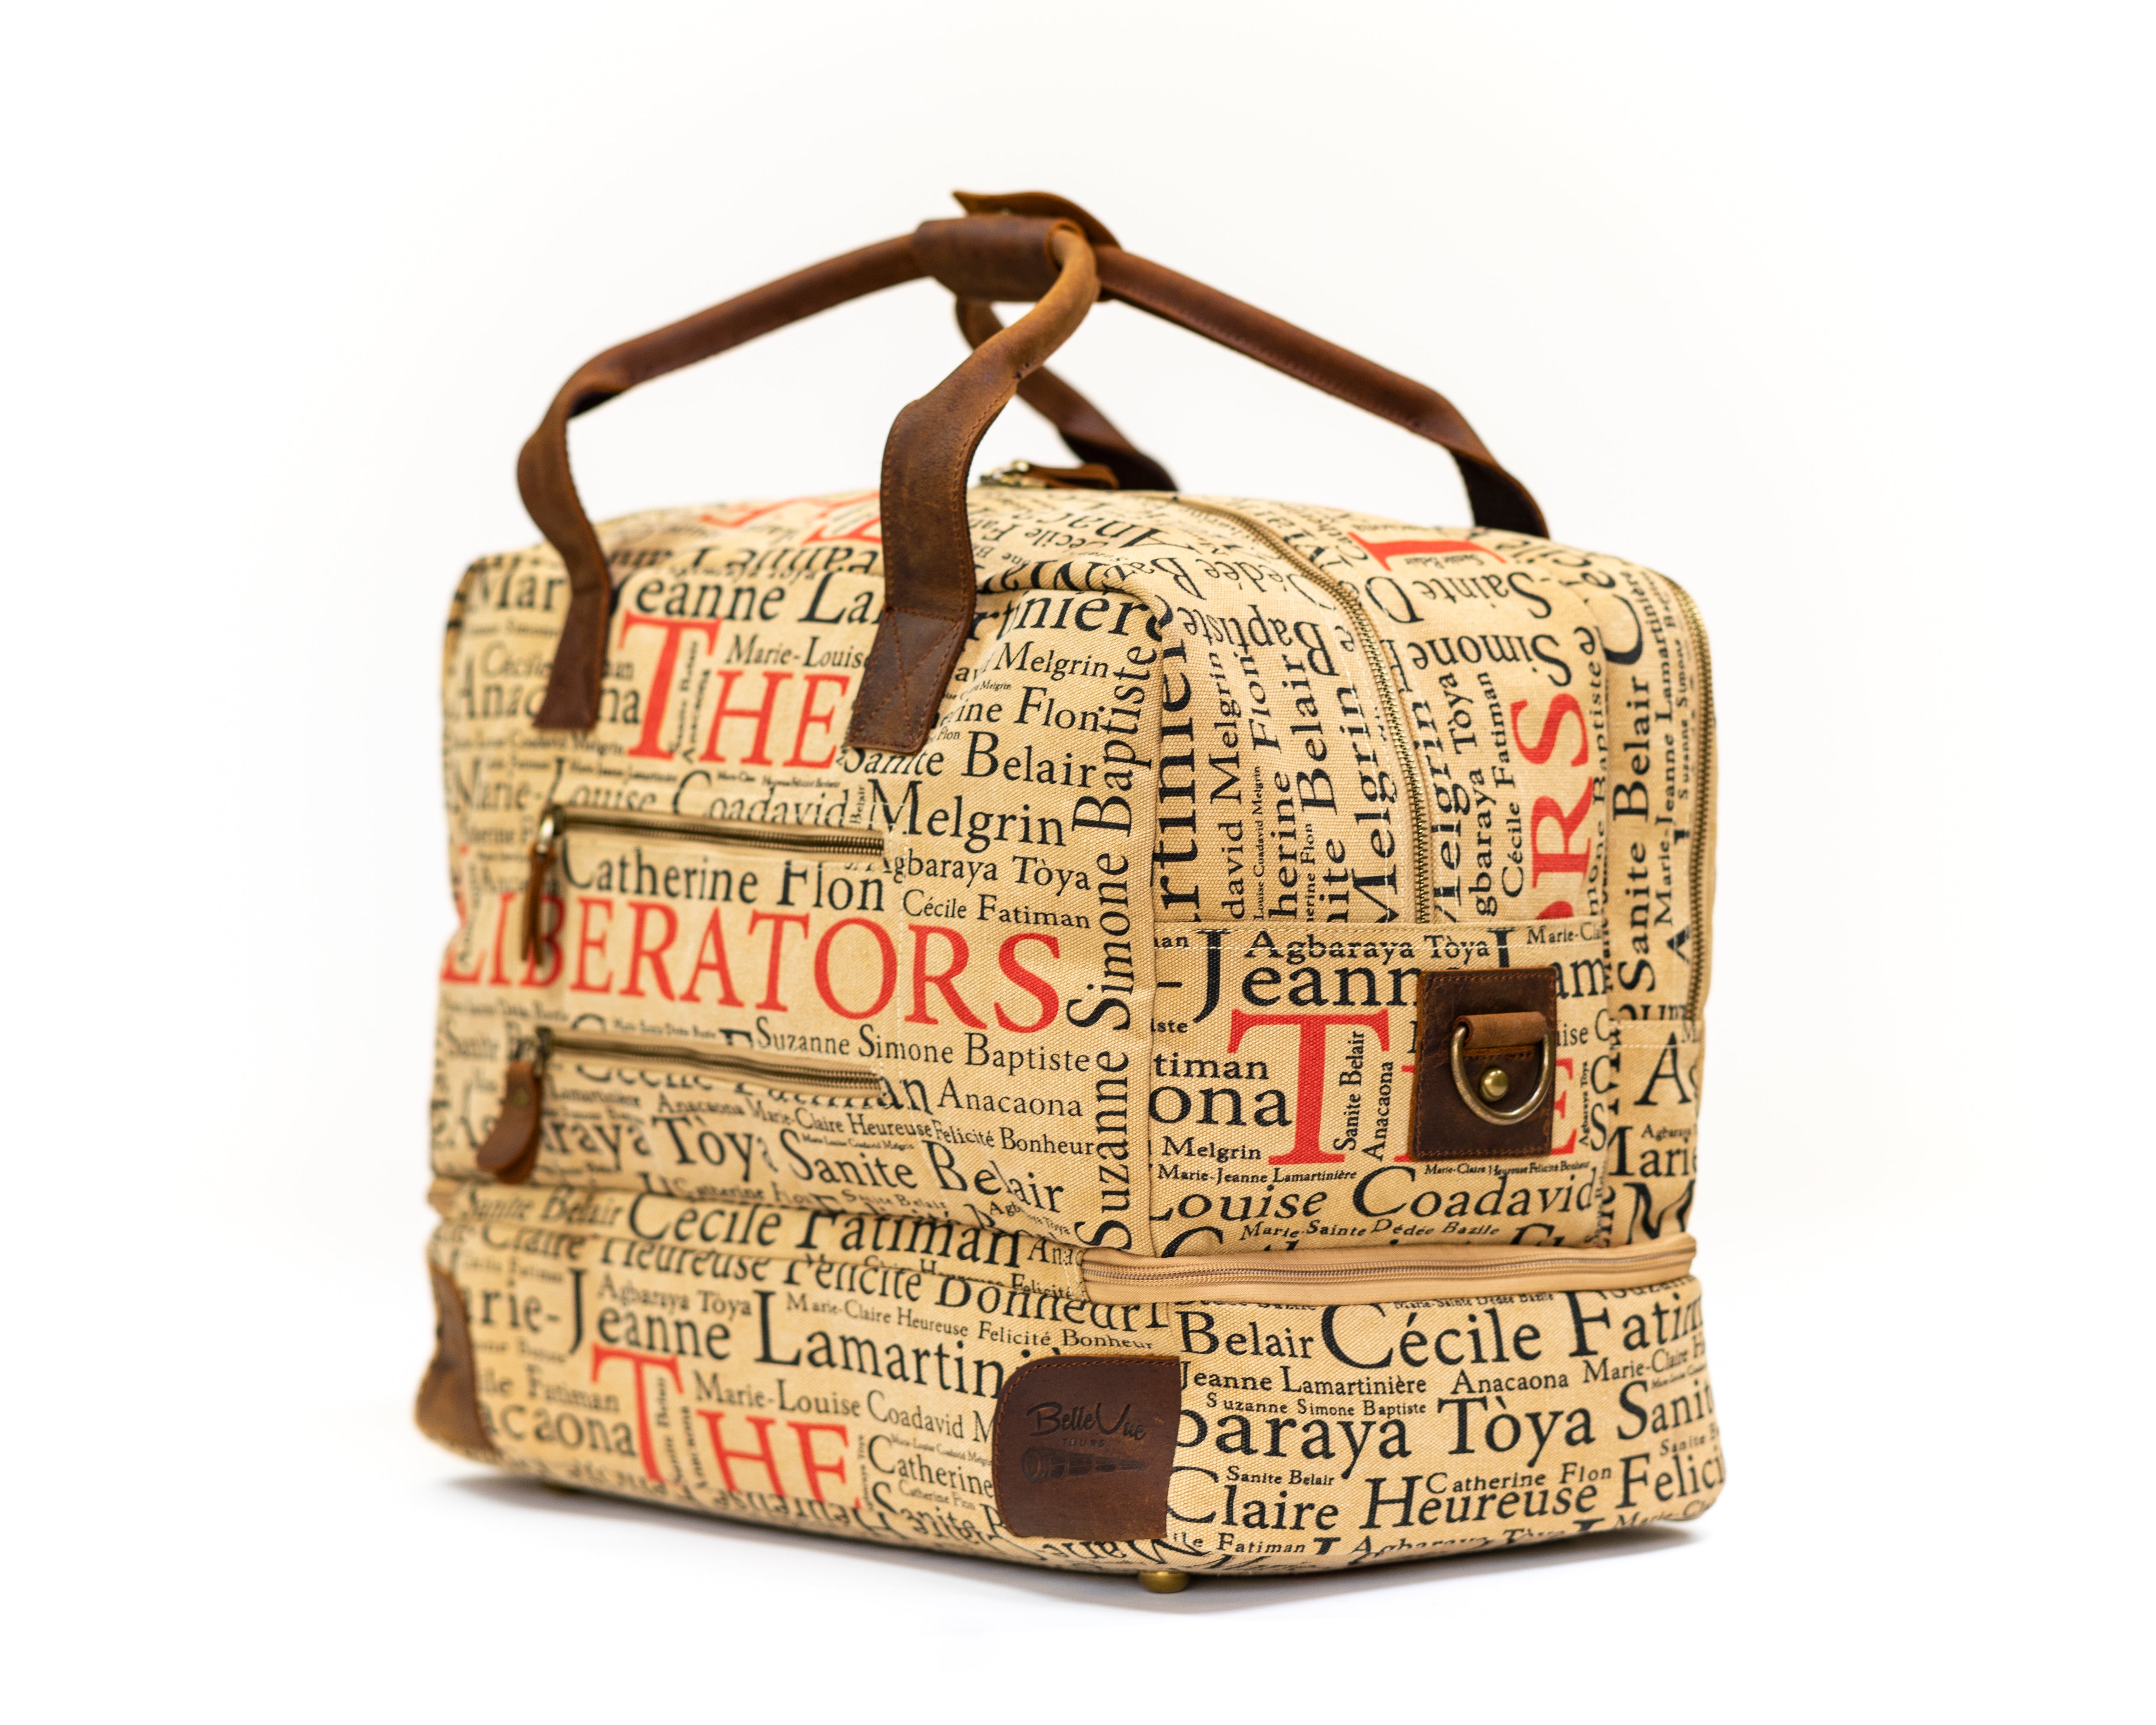 The Links Incorporated Bag Travel Bag Weekend Tote Link 